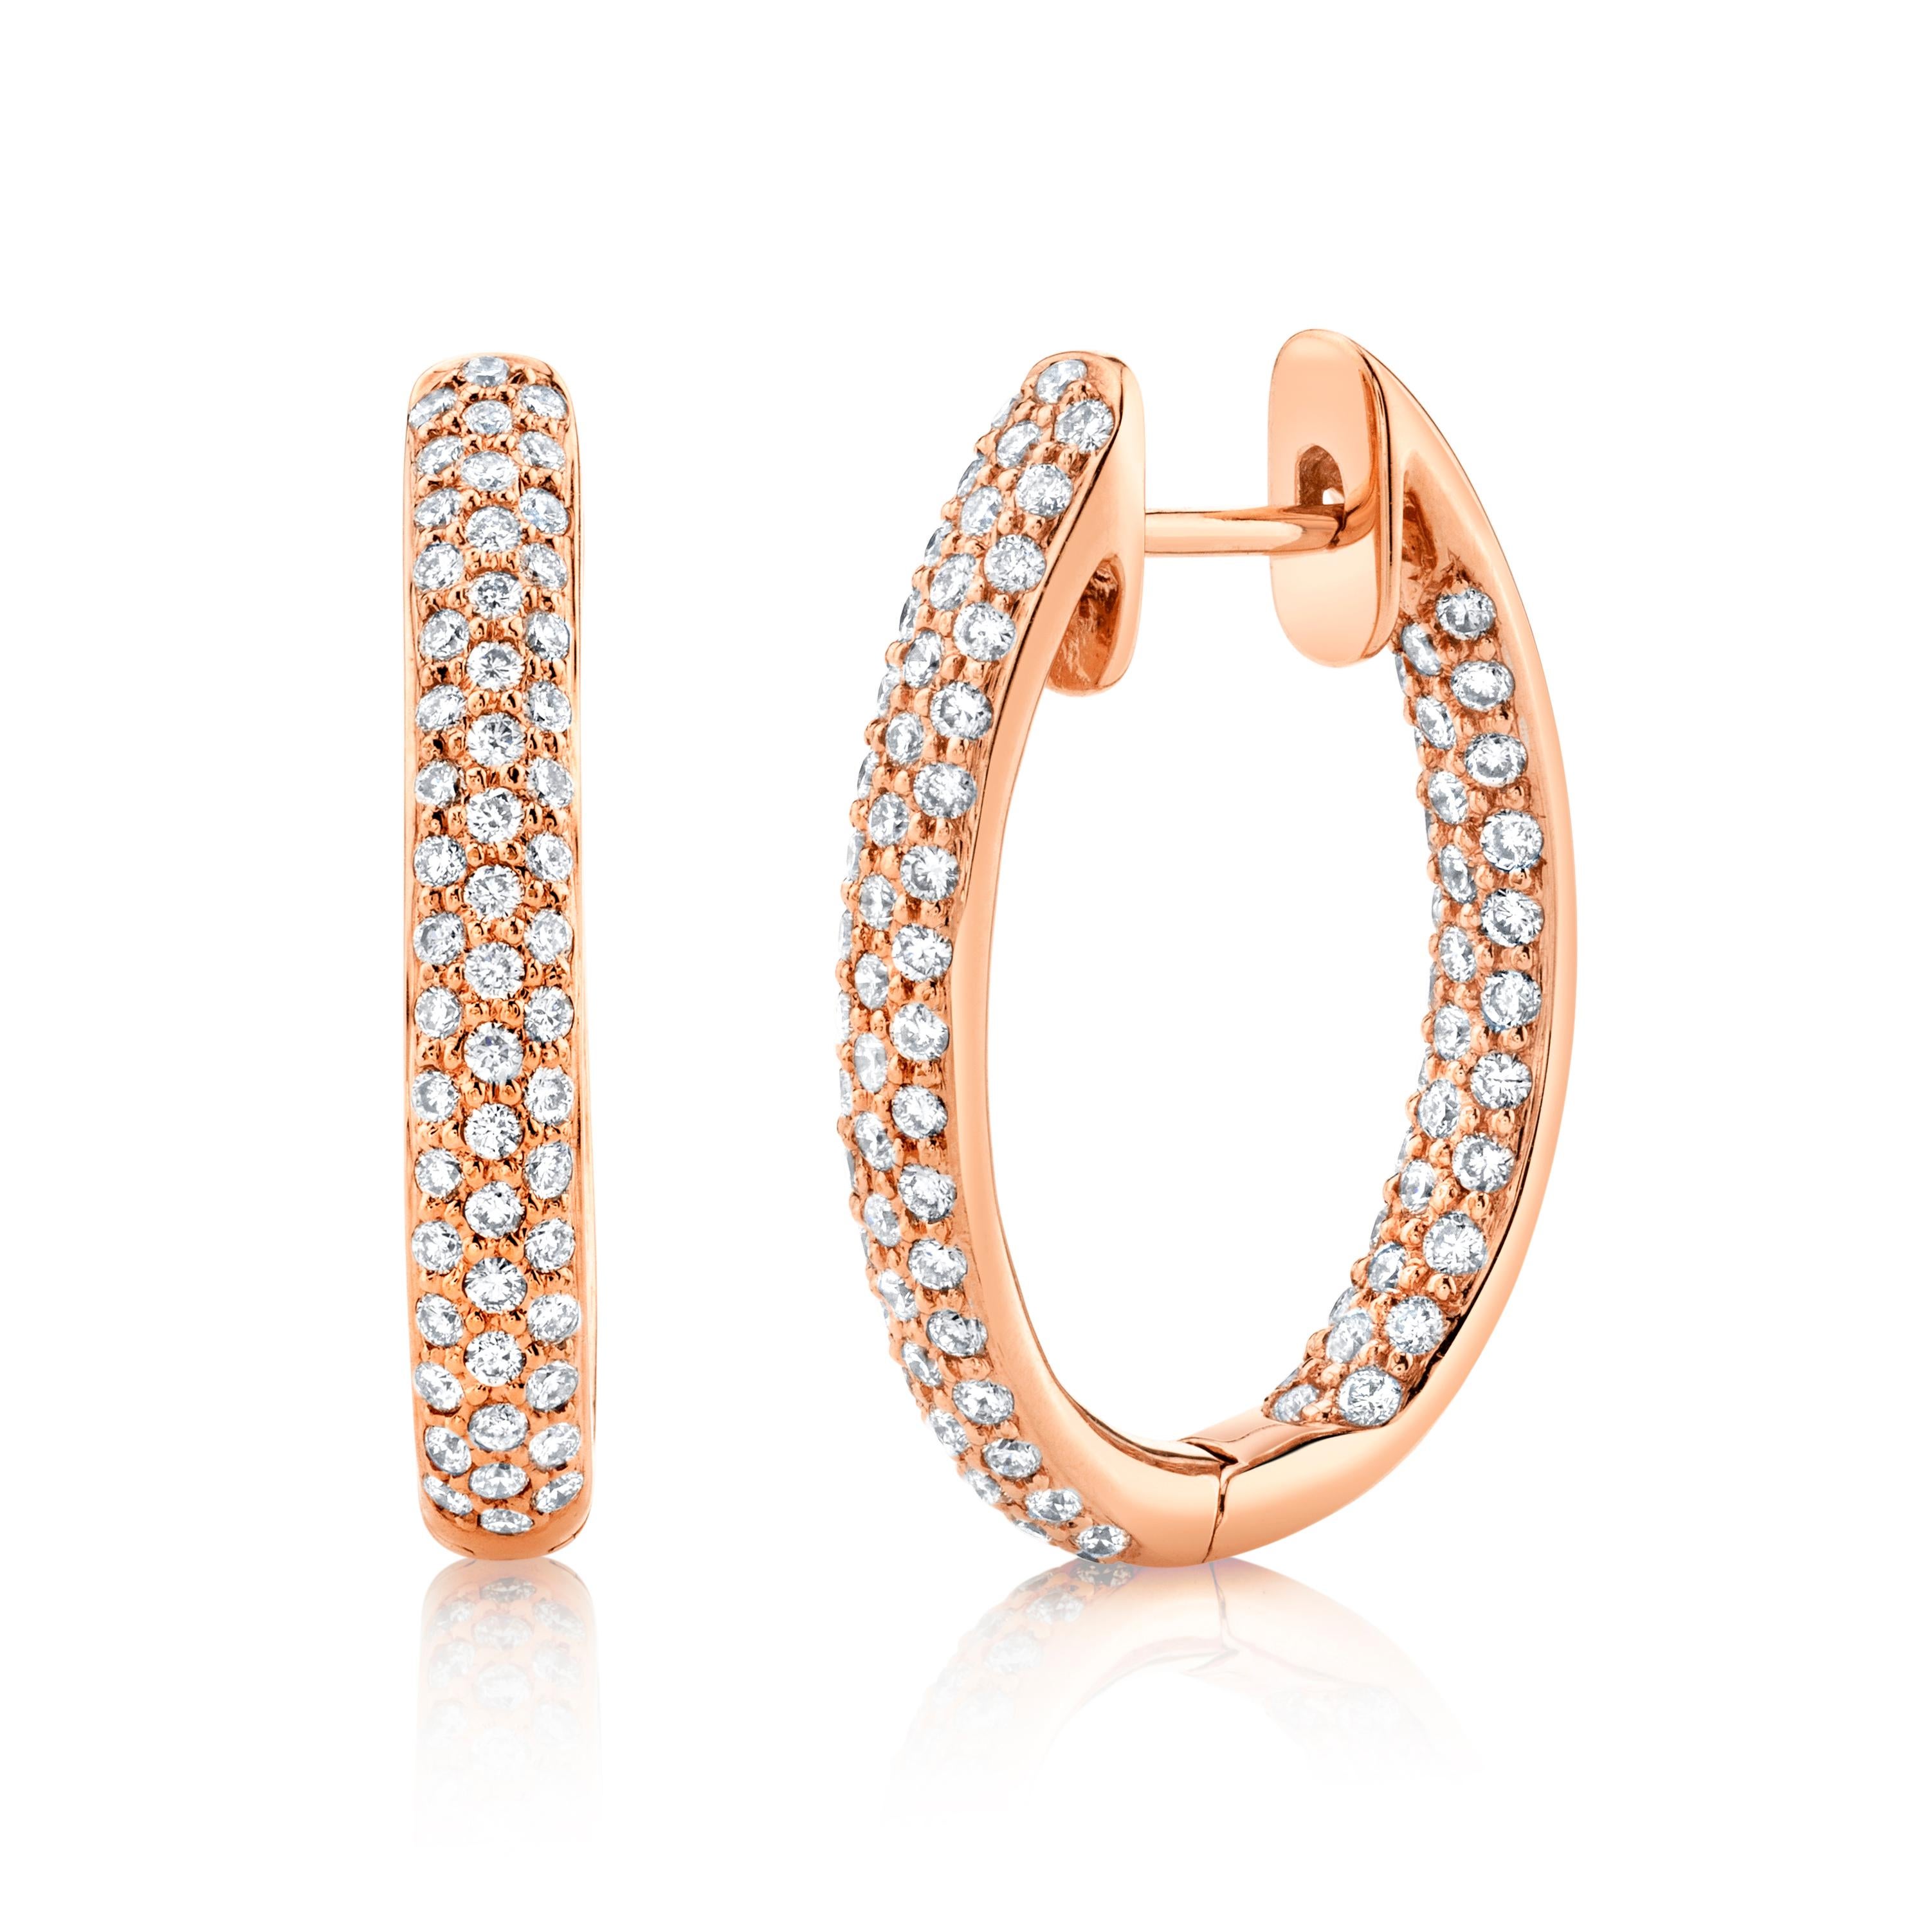 Pave Set Diamond 18k Rose Gold Hinged Inside-Out Hoop Earrings, .84 ct. t.w.